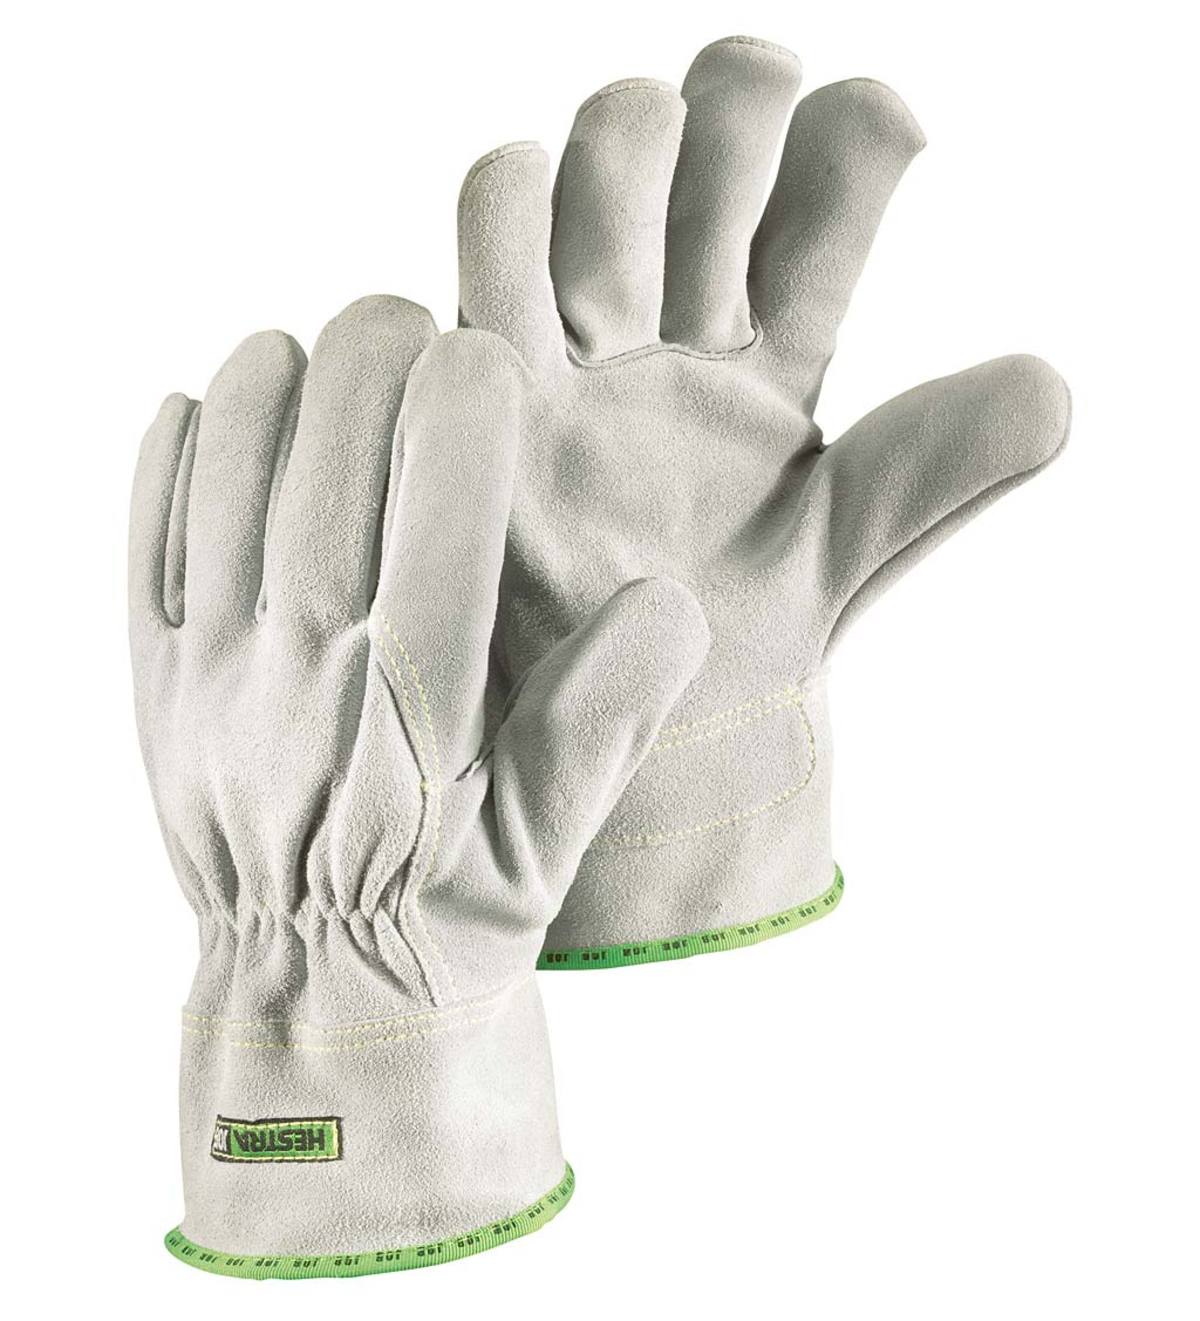 Short Heavy-Duty Fire-Resistant Safety Gloves